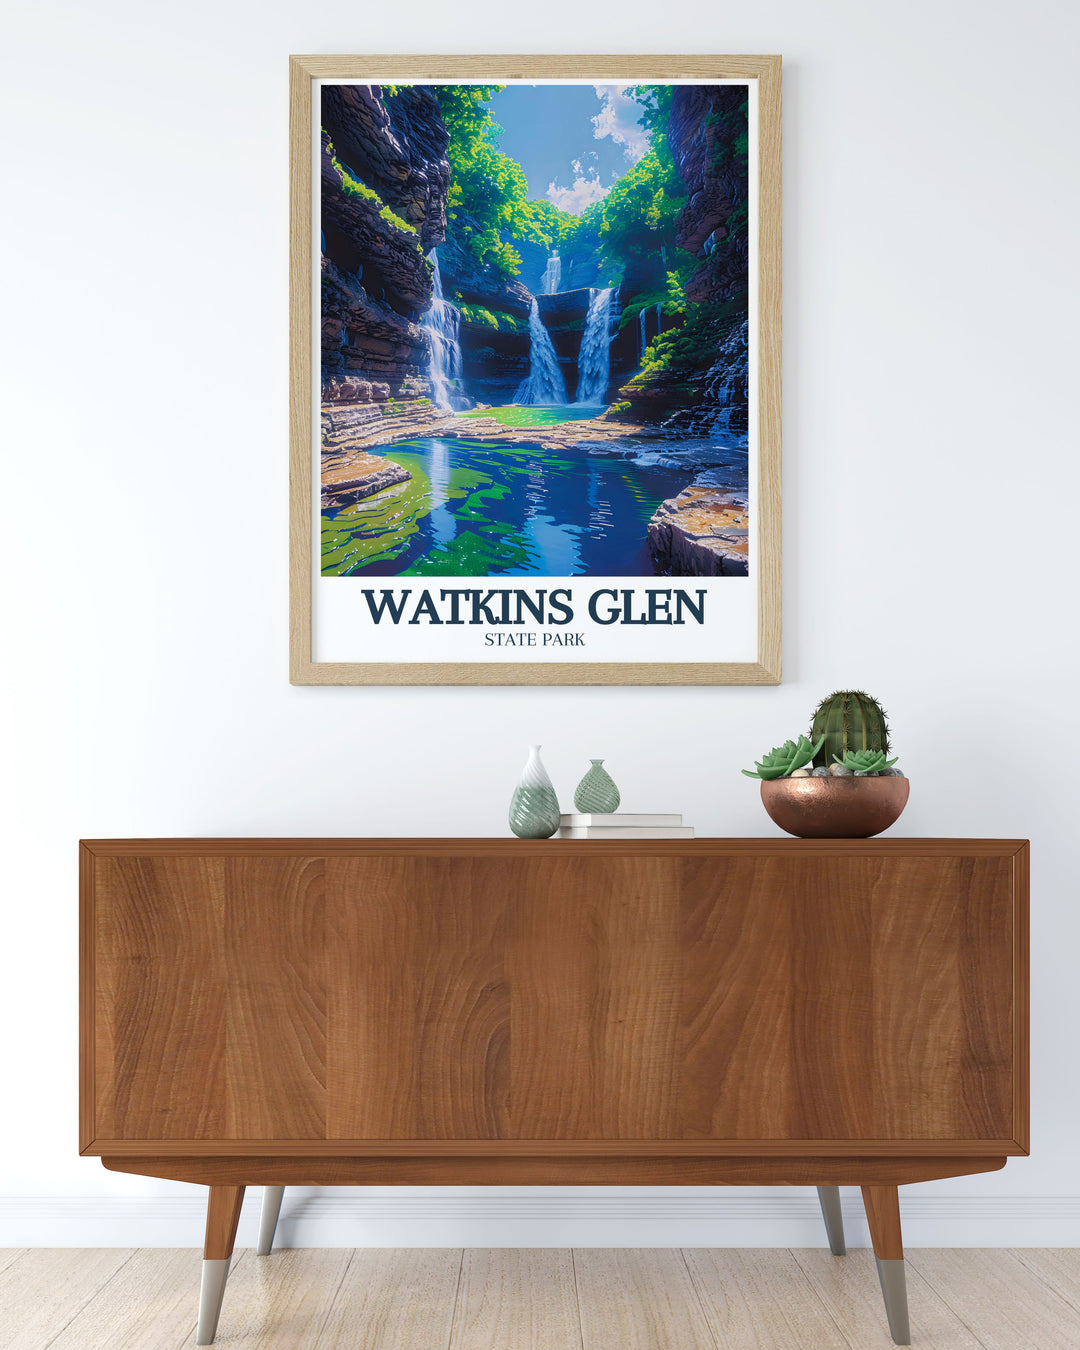 Evoke the natural splendor of New York with this vintage poster of Watkins Glen, featuring the parks majestic waterfalls and verdant surroundings, a beautiful addition to any art collection.